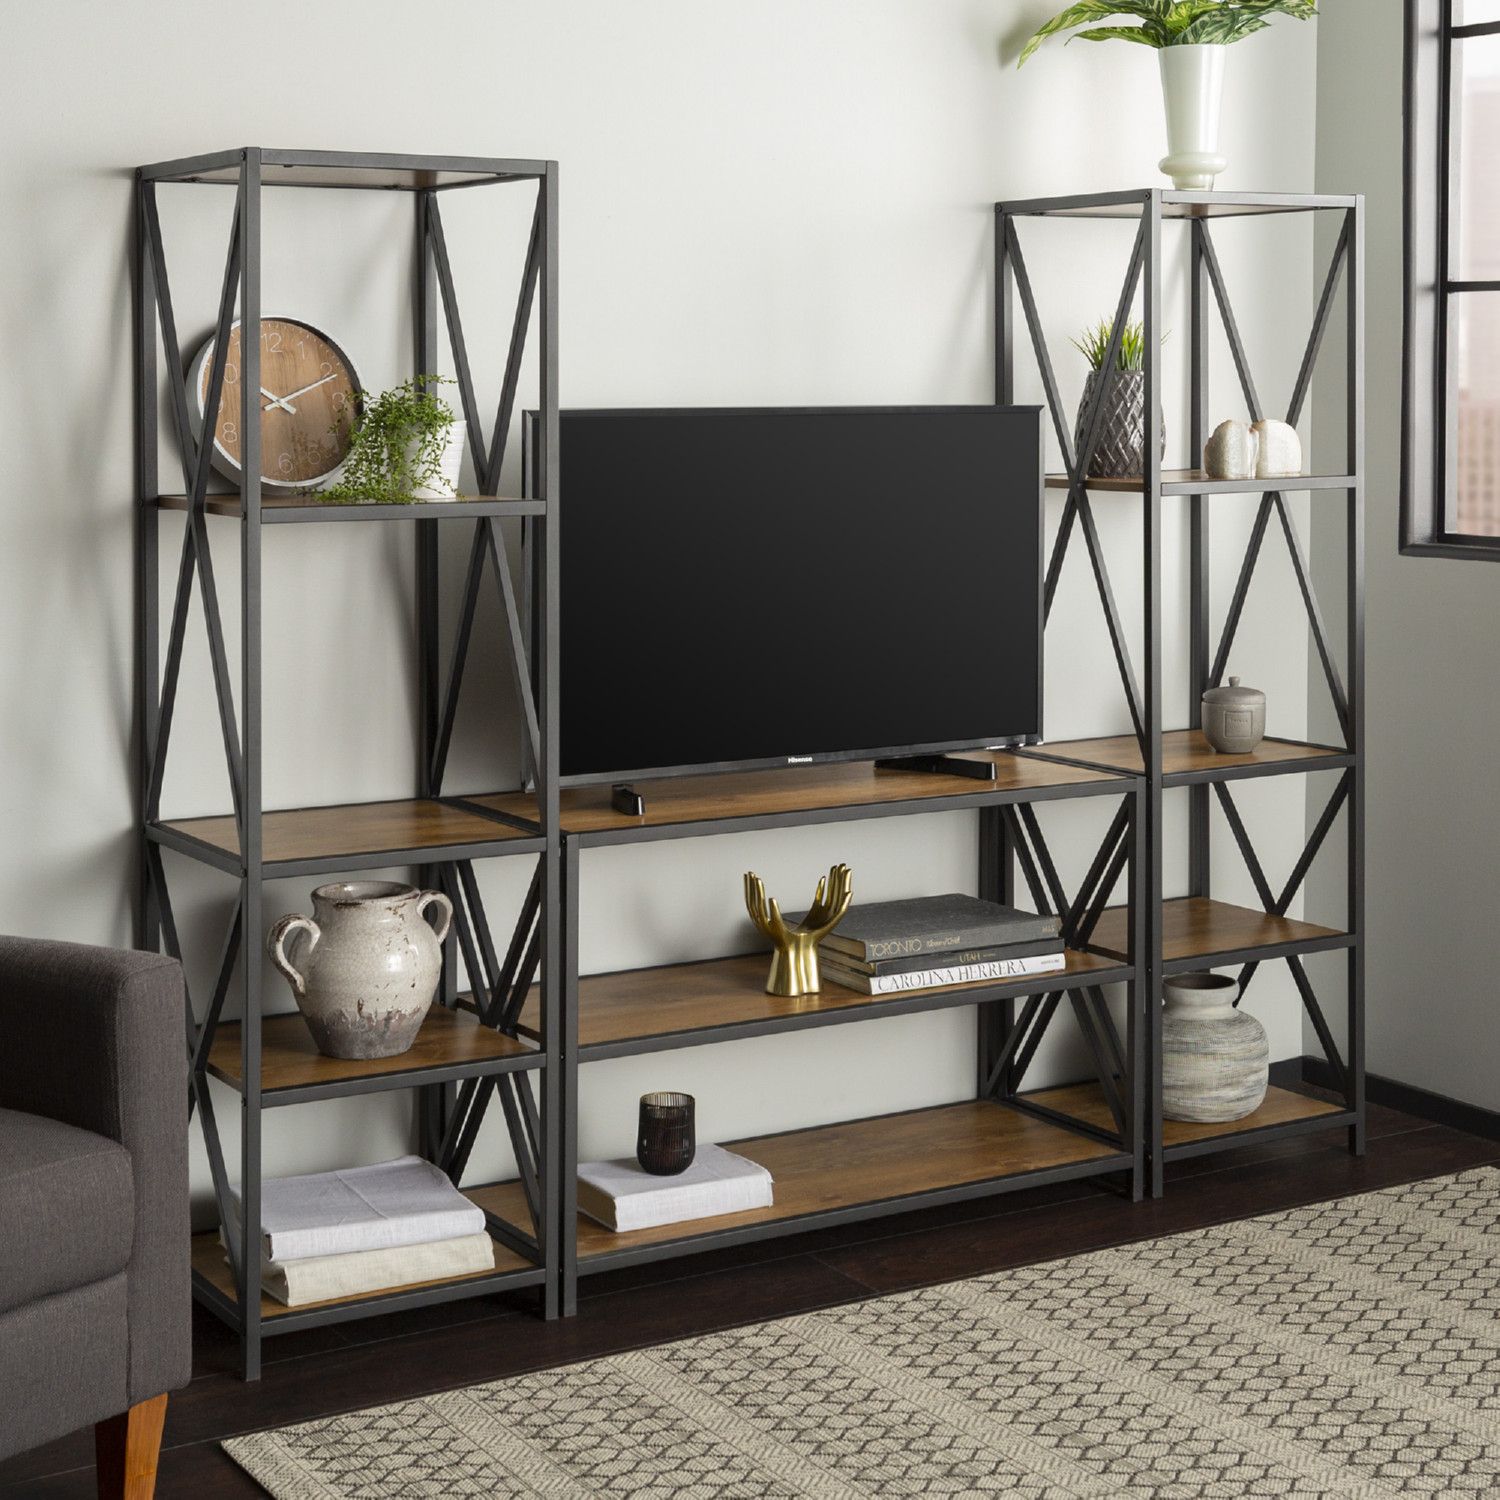 Walker Edison Gbs40xm2bw 3 Piece Rustic Industrial Bookcase Set In Barnwood  Finish For Barnwood Bookcases (View 14 of 15)